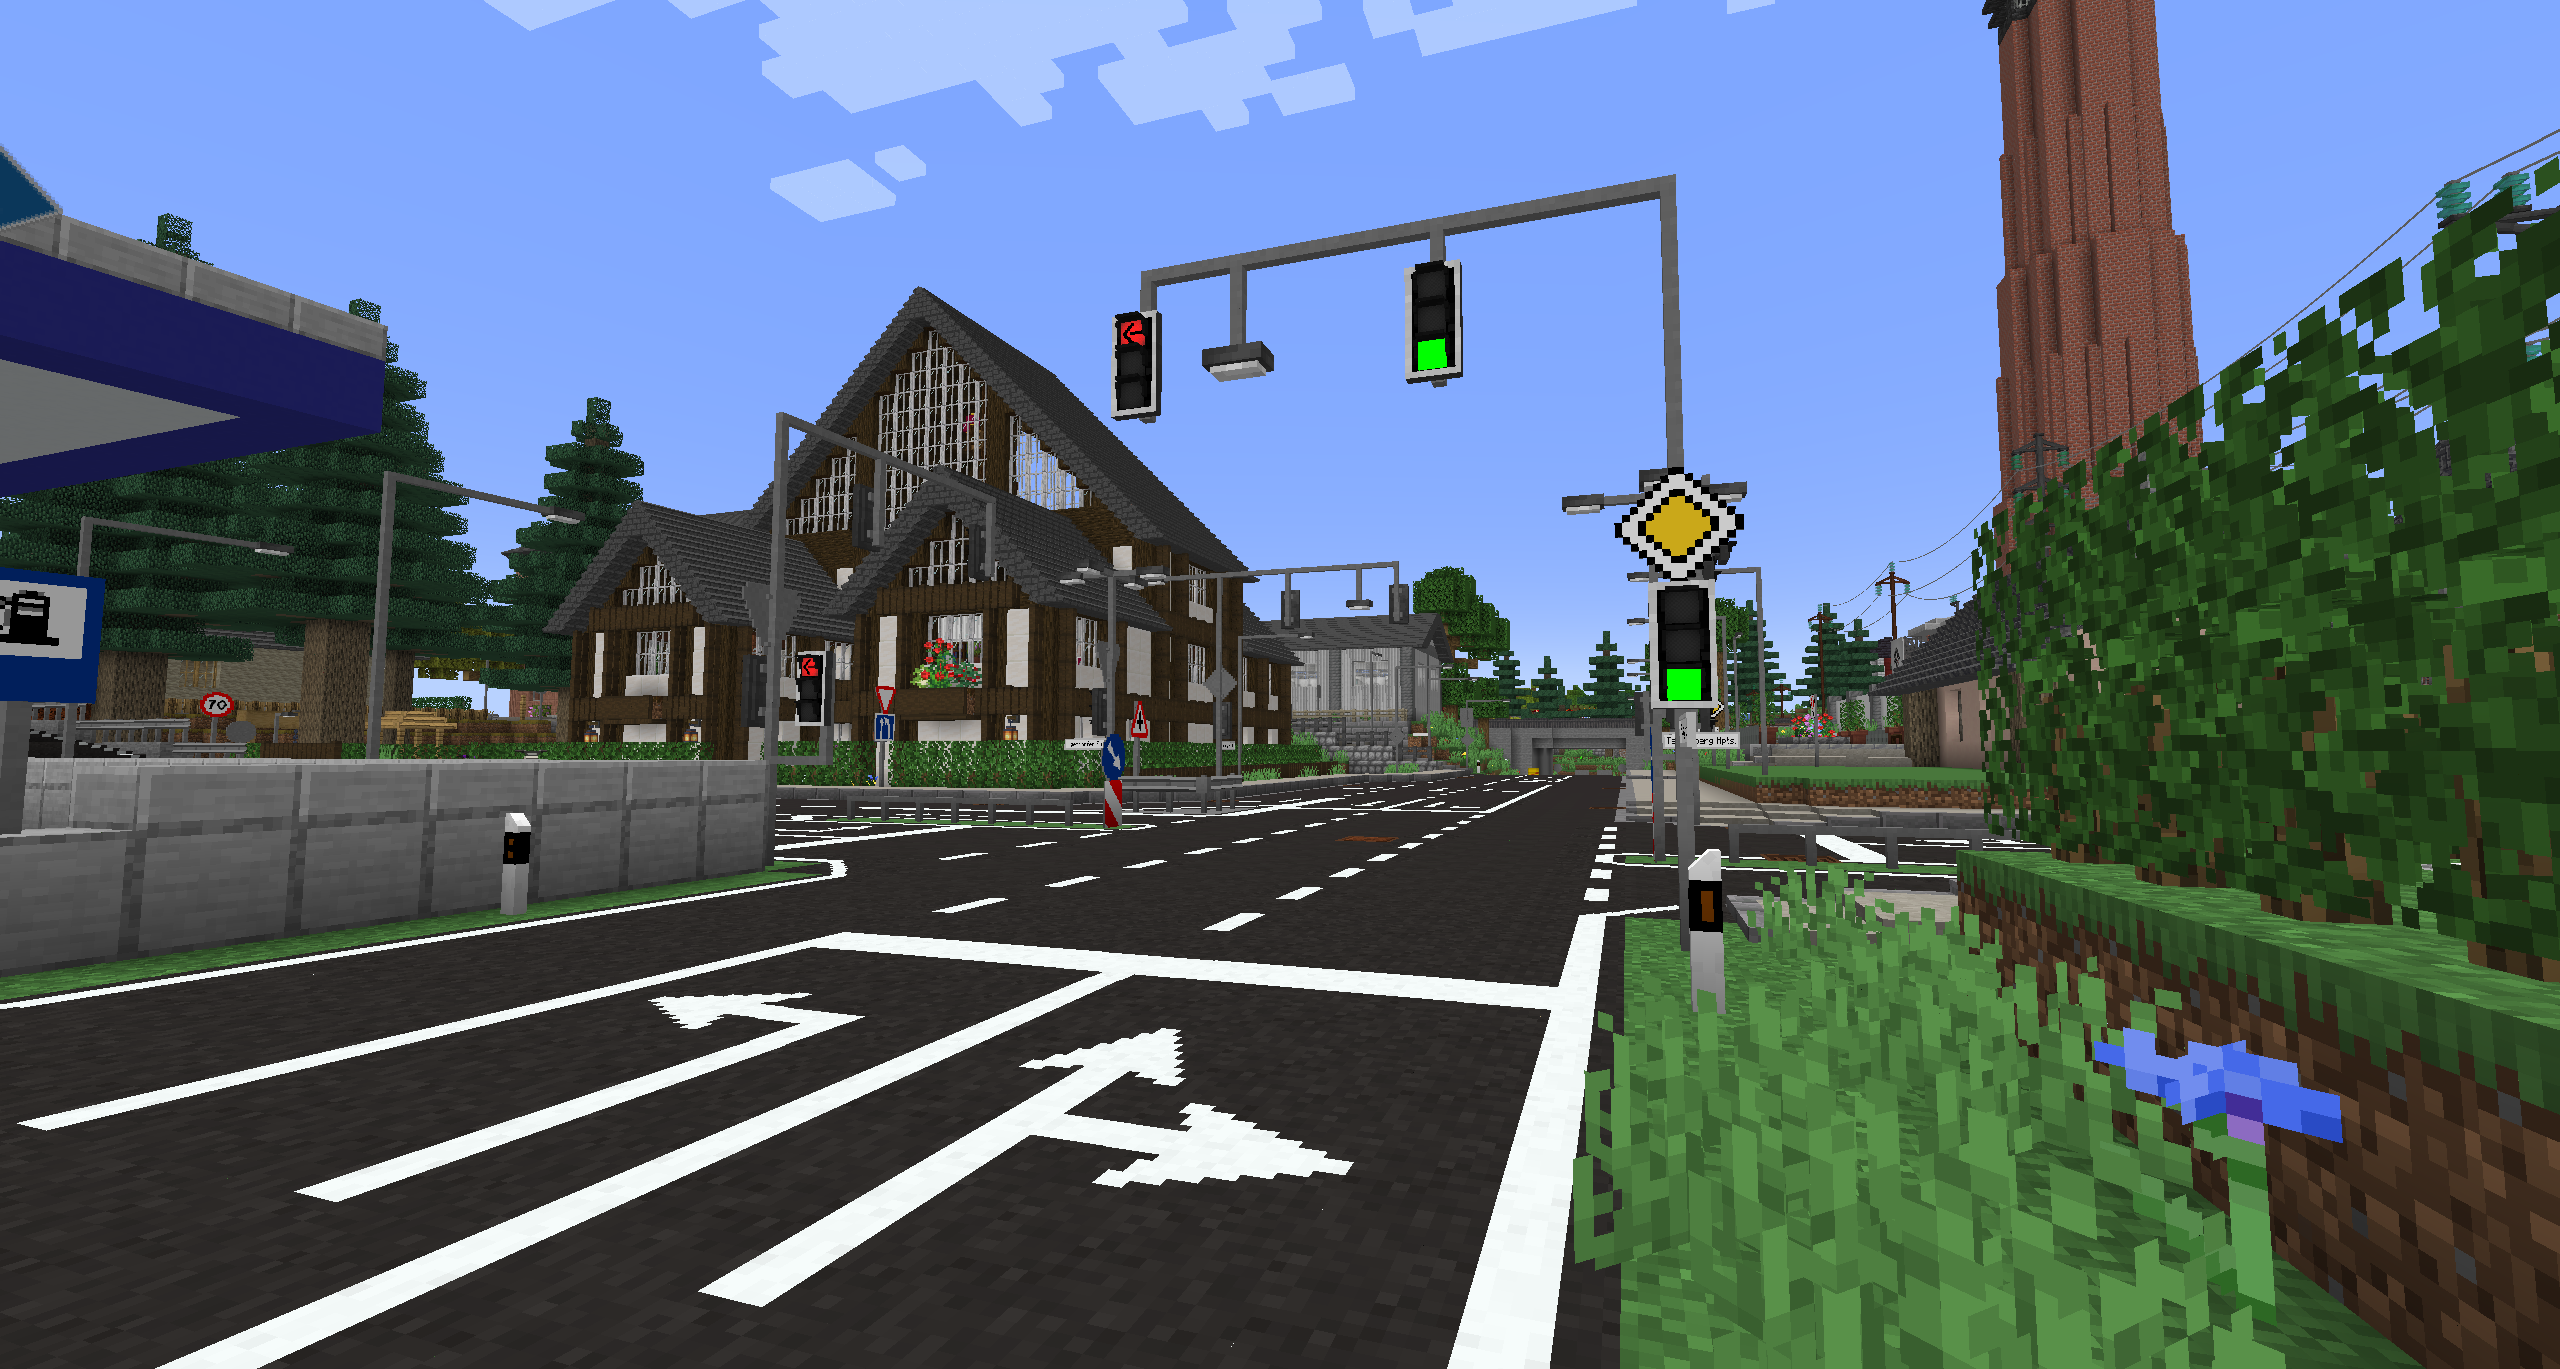 Create customizable and working traffic lights.
(The image is for illustrative purposes only and contains content from other mods)